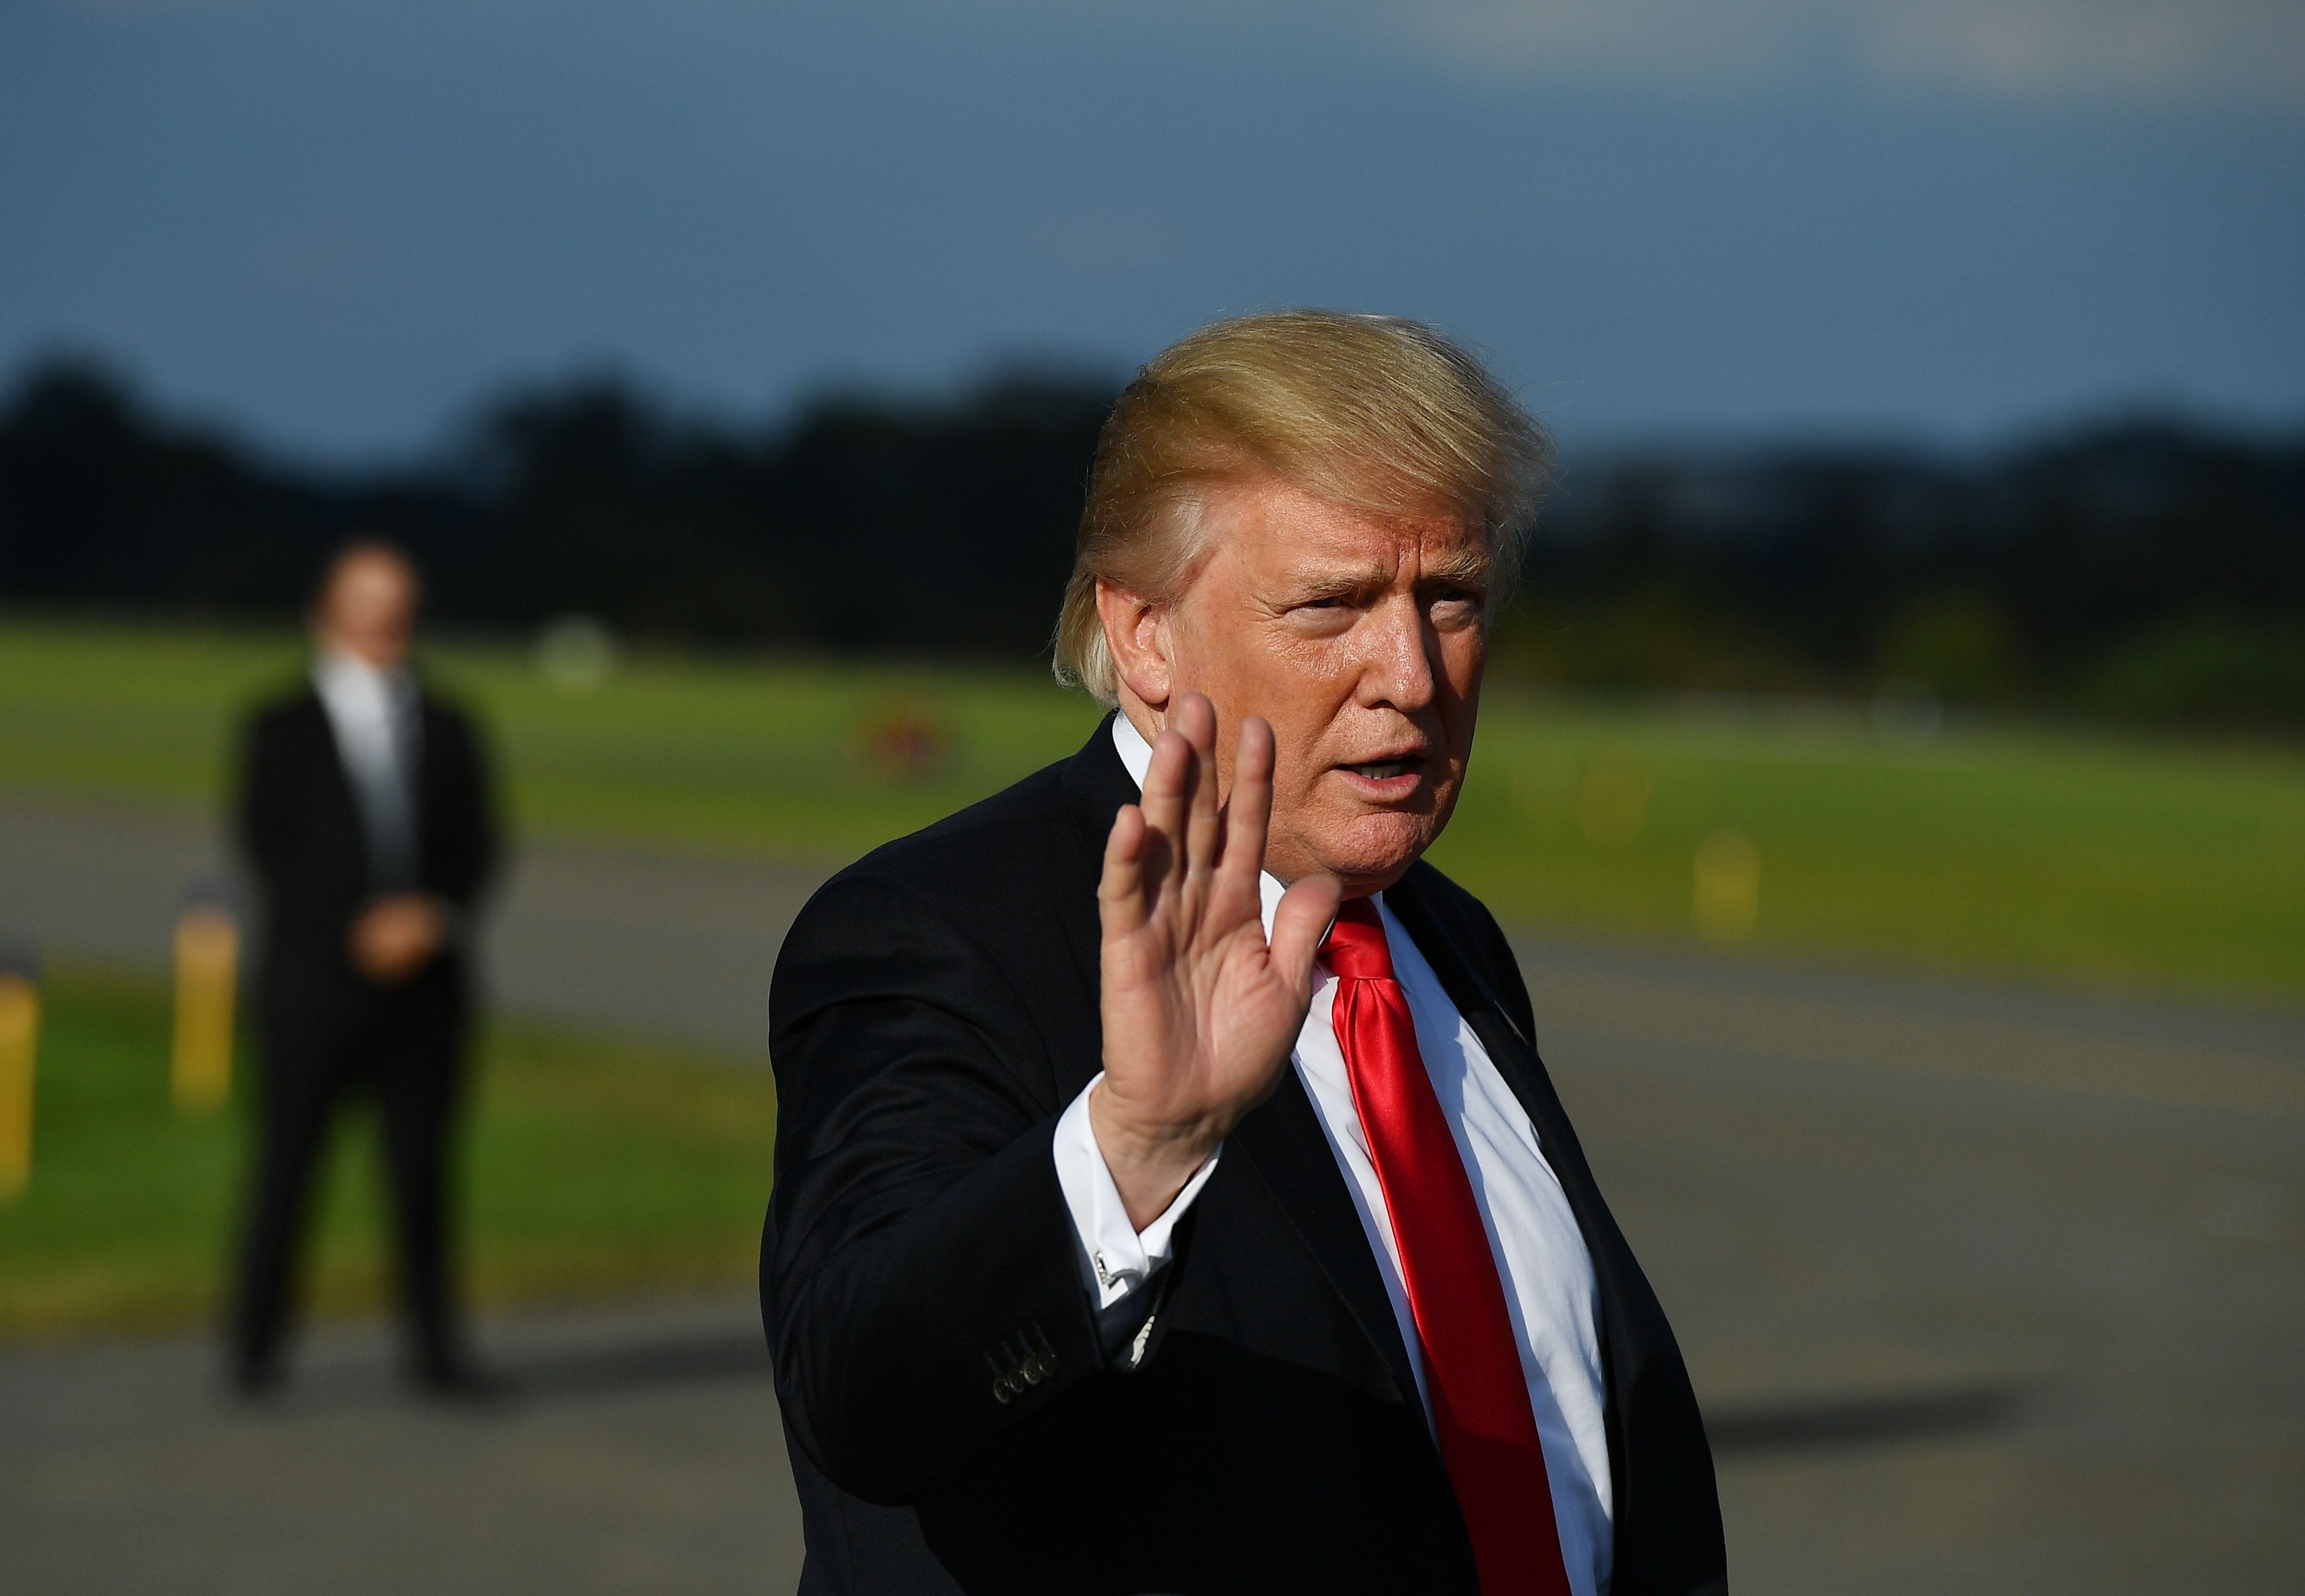 US President Donald Trump waves after  stepping off Air Force One upon arrival at Morristown Municipal Airport in Morristown, New Jersey on September 15, 2017. (MANDEL NGAN—AFP/Getty Images)